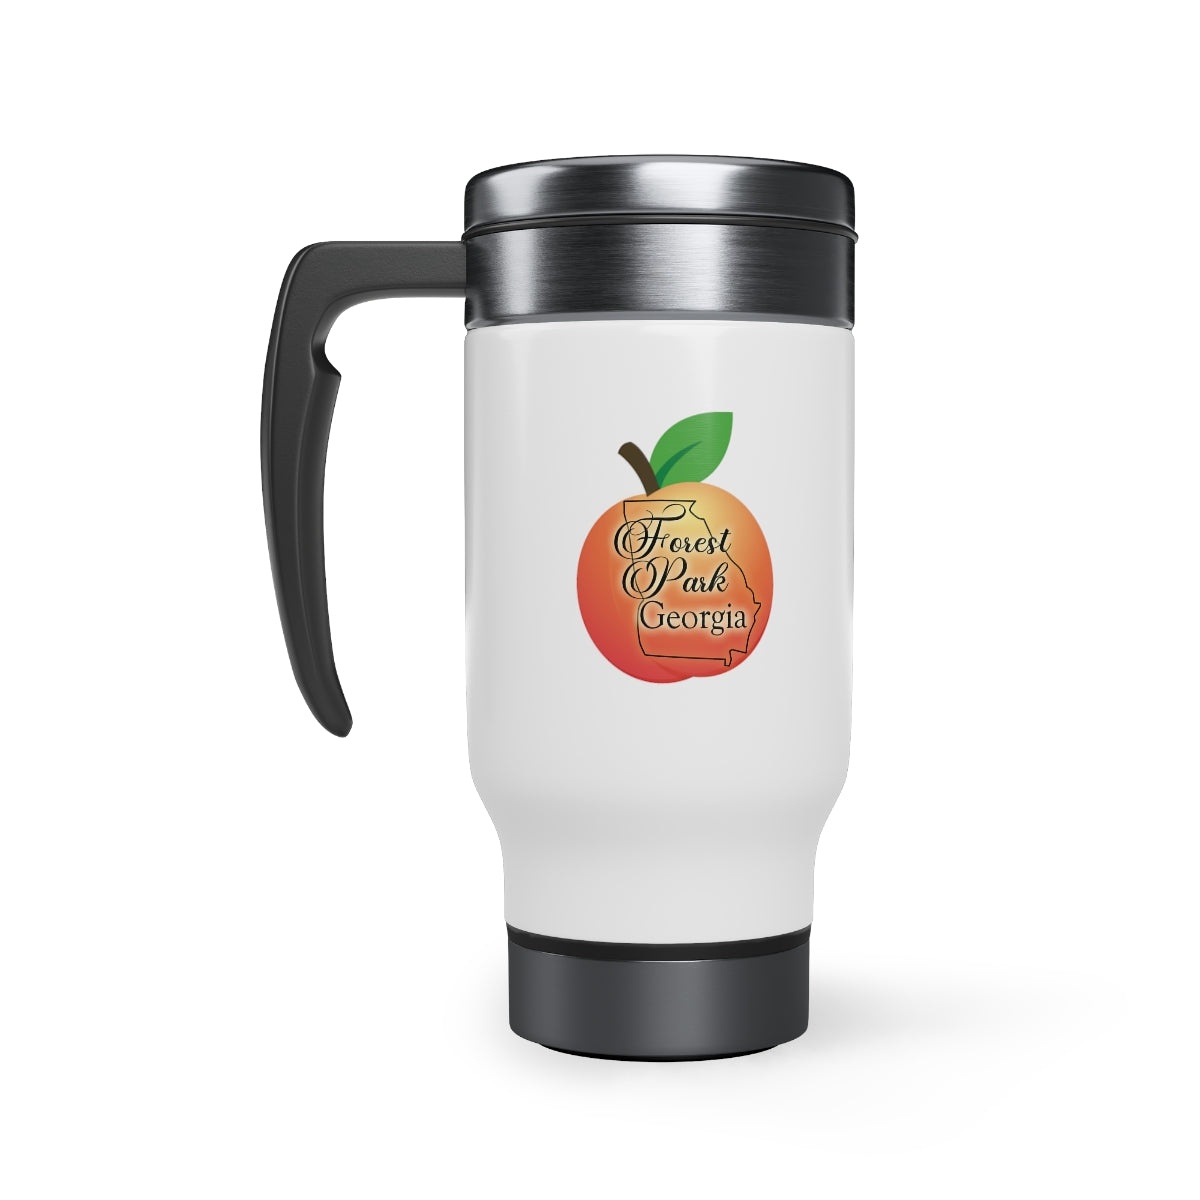 Forest Park Georgia Stainless Steel Travel Mug with Handle, 14oz